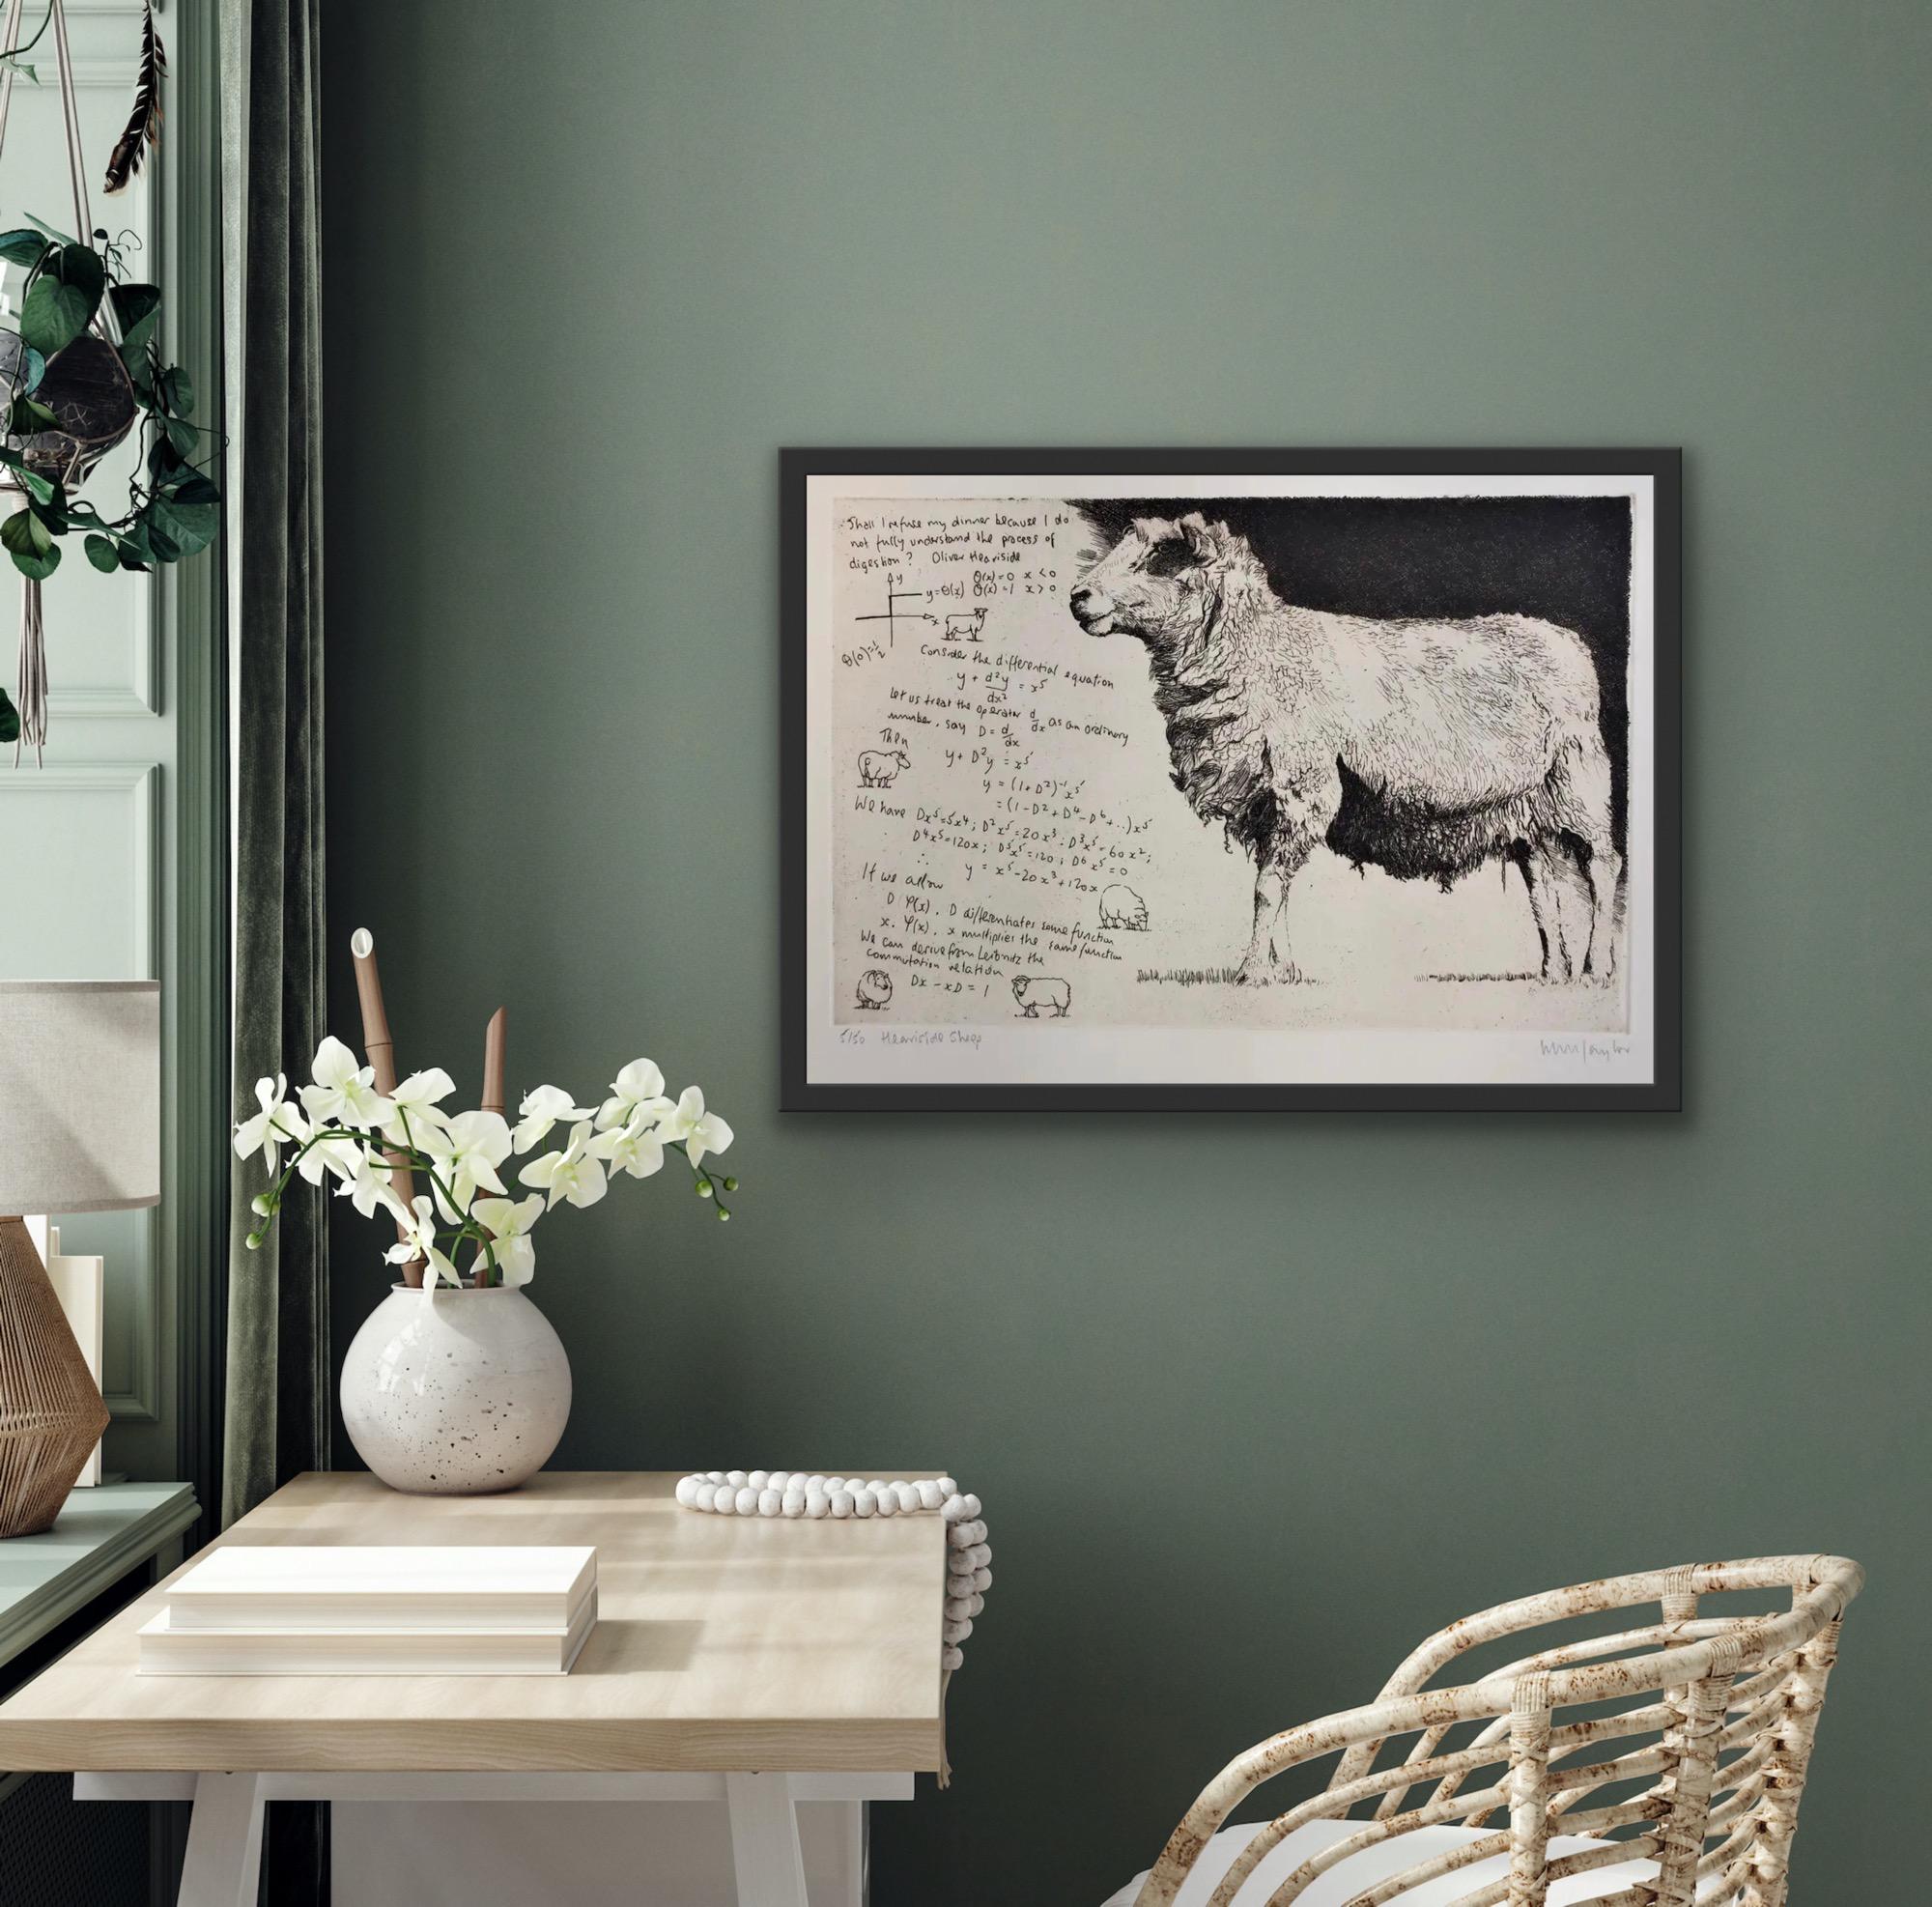 Heaviside Sheep is an original etching by Will Taylor. It explores animal images and mathematics, including the works of Oliver Heaviside. Each impression is marked on the reverse with the artist’s studio stamp.

Additional Information:
WILL